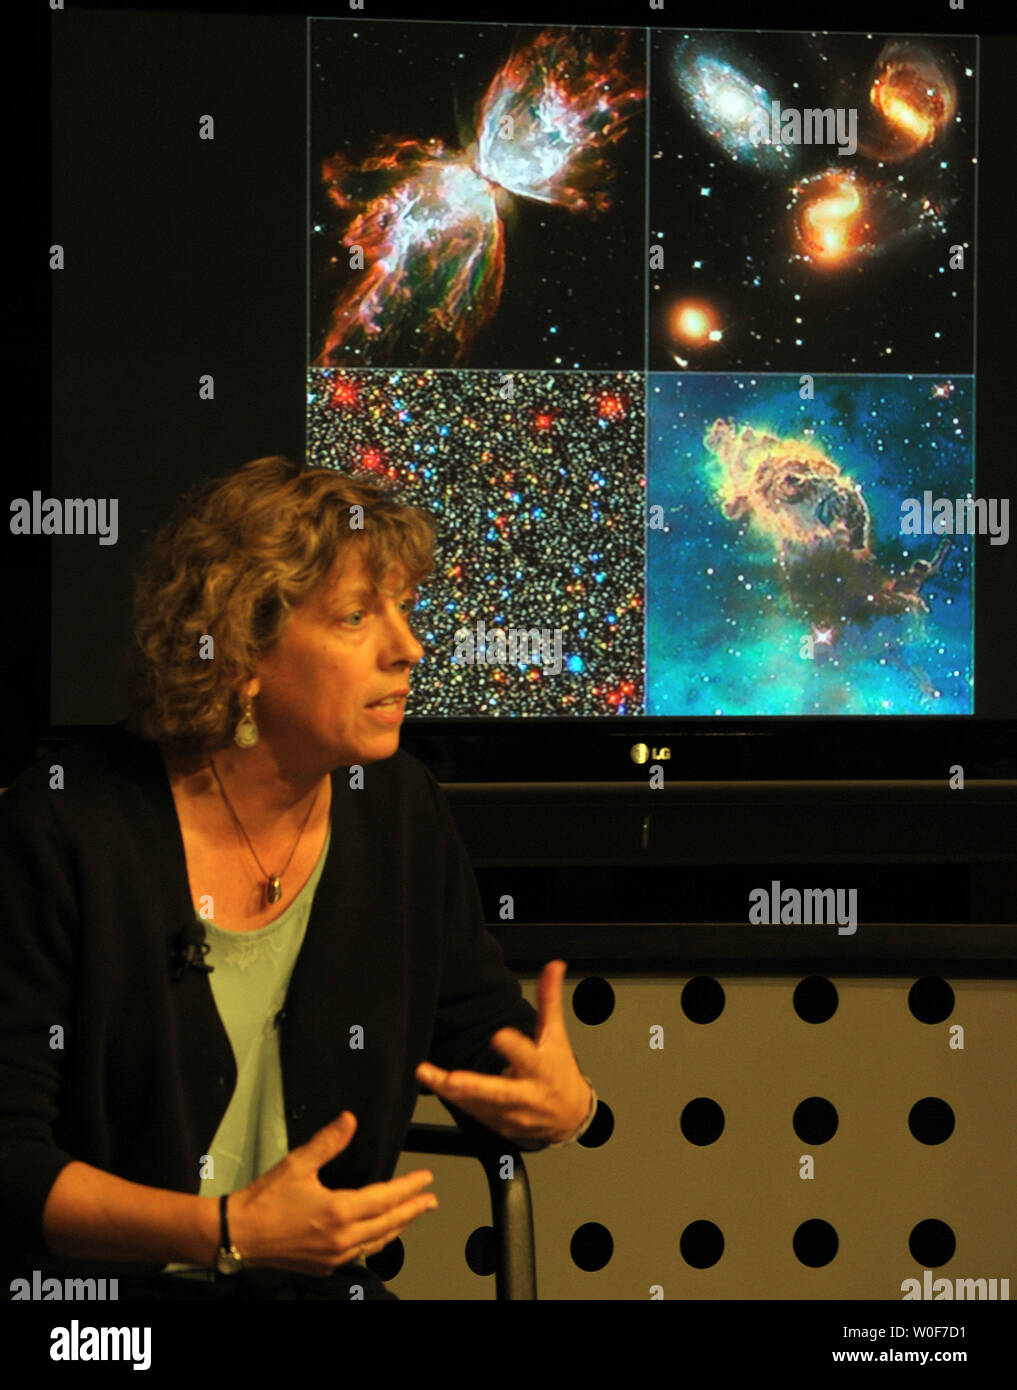 Heidi Hammel, senior research scientist at the Space Science Institute, discusses new Hubble images as NASA unveils new science from the recently refurbished Hubble Space Telescope at NASA headquarters in Washington on September 9, 2009.   UPI/Roger L. Wollenberg Stock Photo